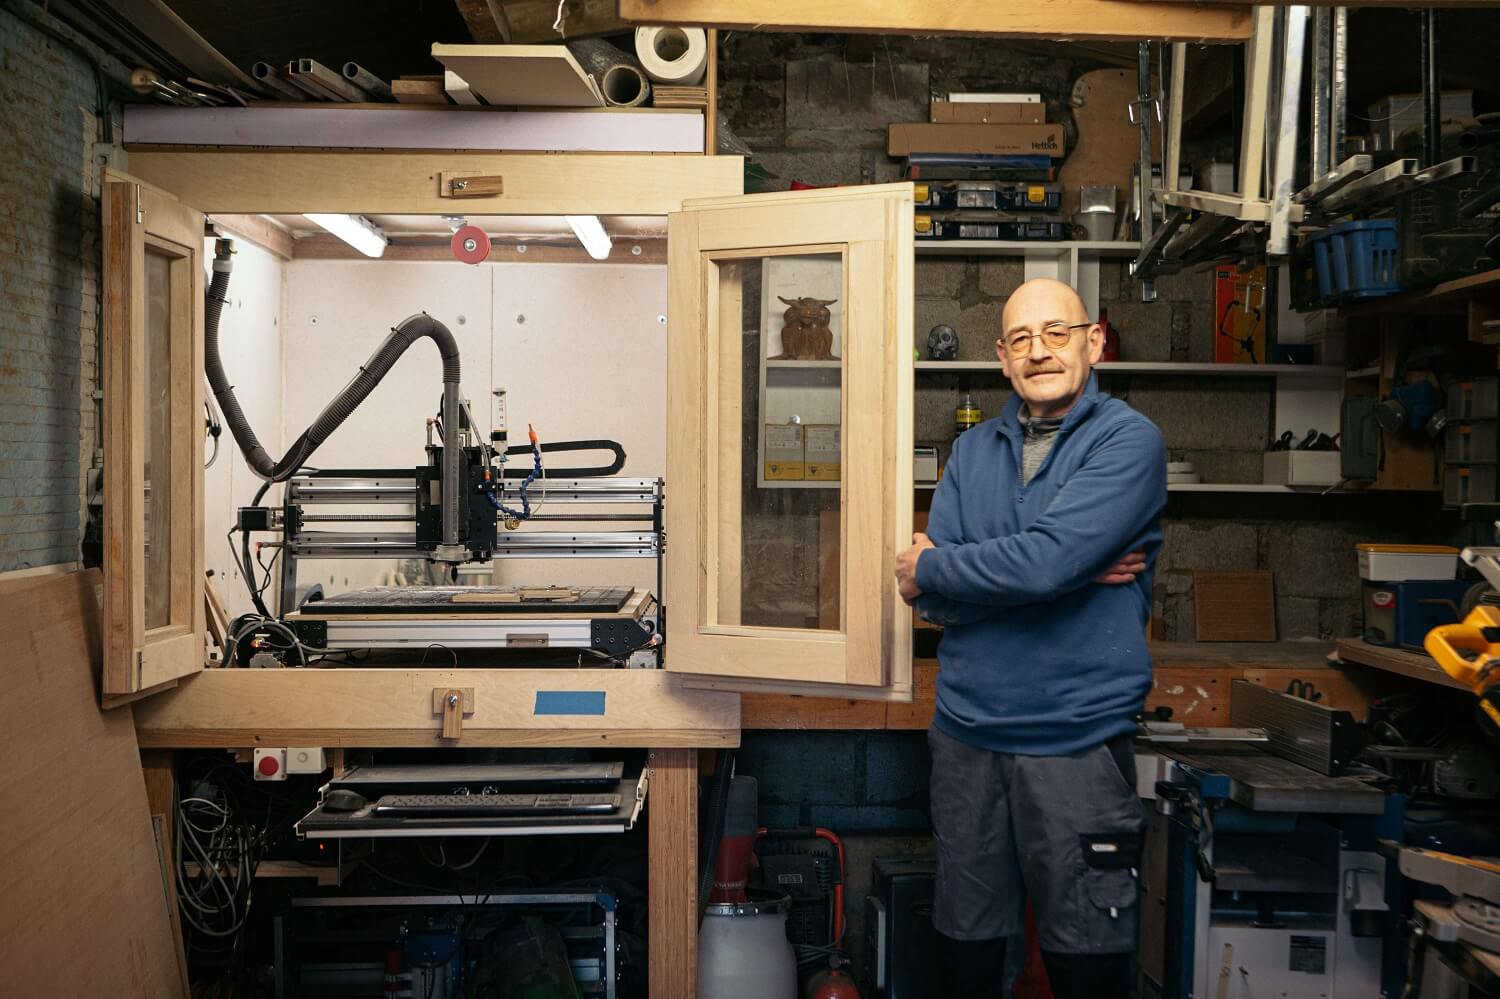 PRO CNC milling machine in a homemade enclosure